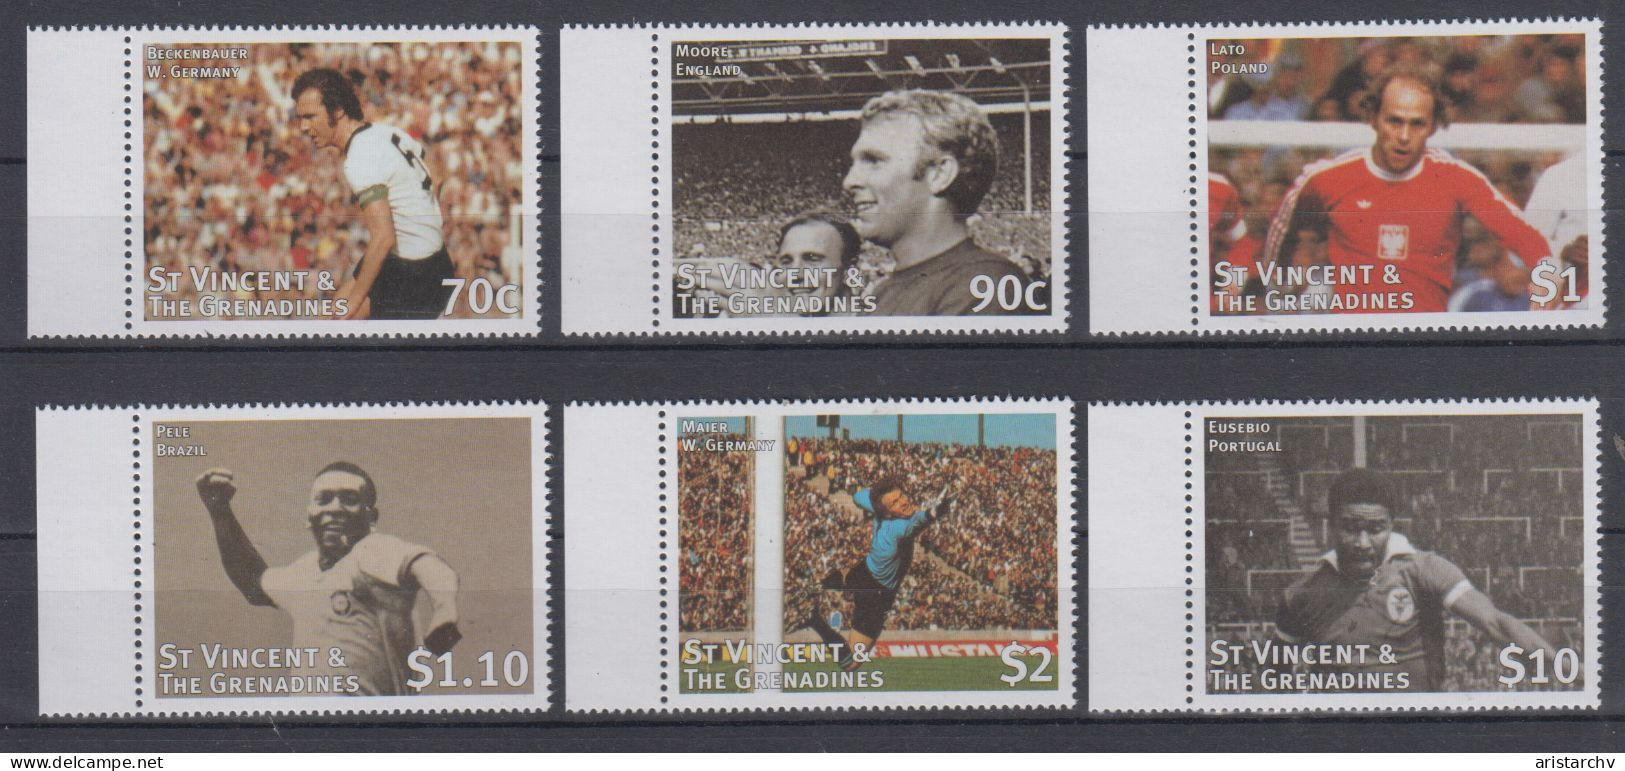 ST. VINCENT GRENADINES 1998 FOOTBALL WORLD CUP 4 S/SHEETS 4 SHEETLETS AND 6 STAMPS